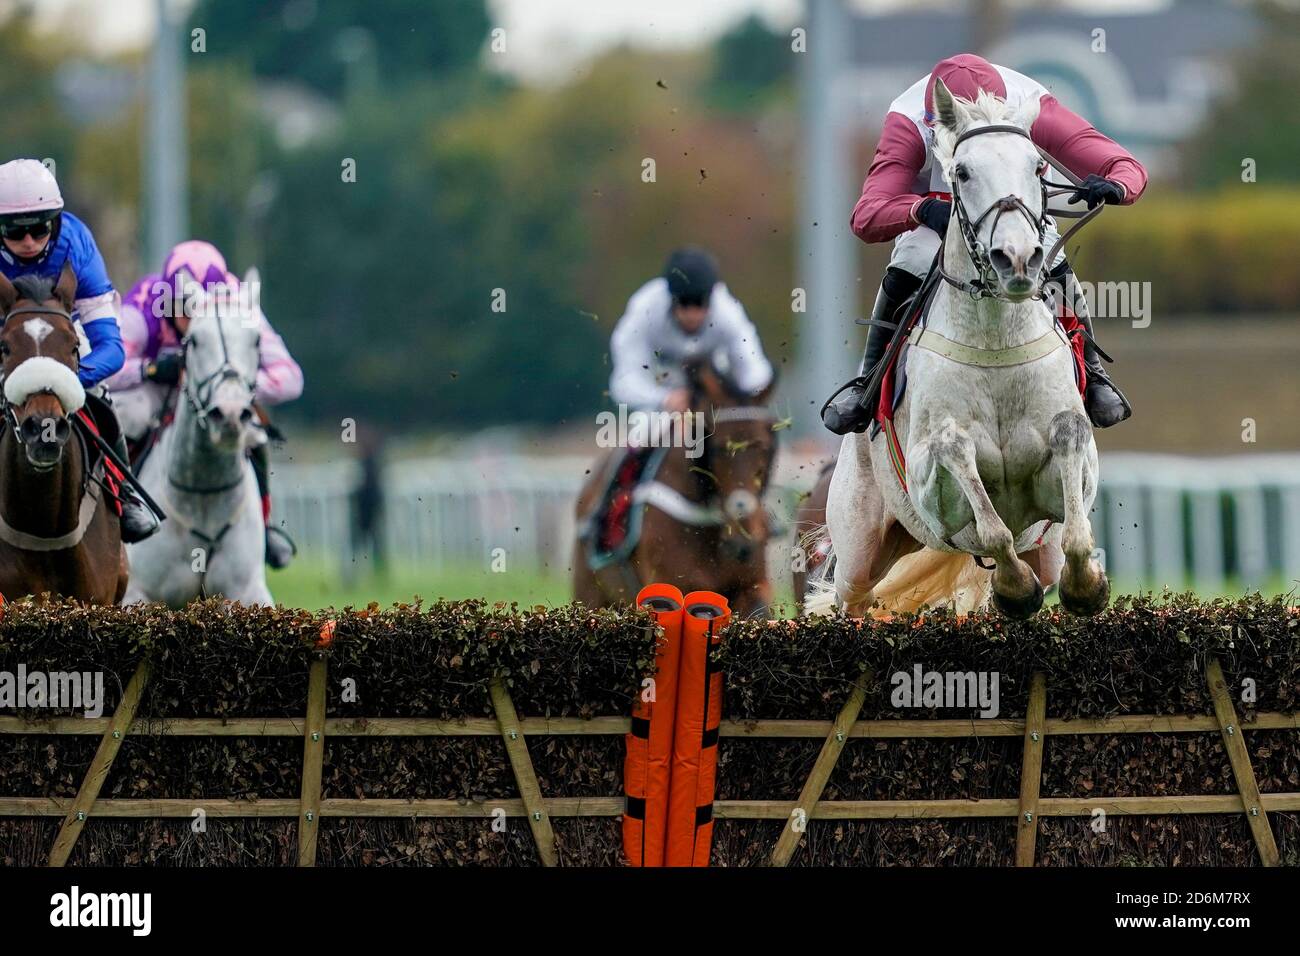 Silver Streak ridden by Tom O'Brien (right) goes on to win The Racing TV Hurdle at Kempton Park Racecourse. Stock Photo